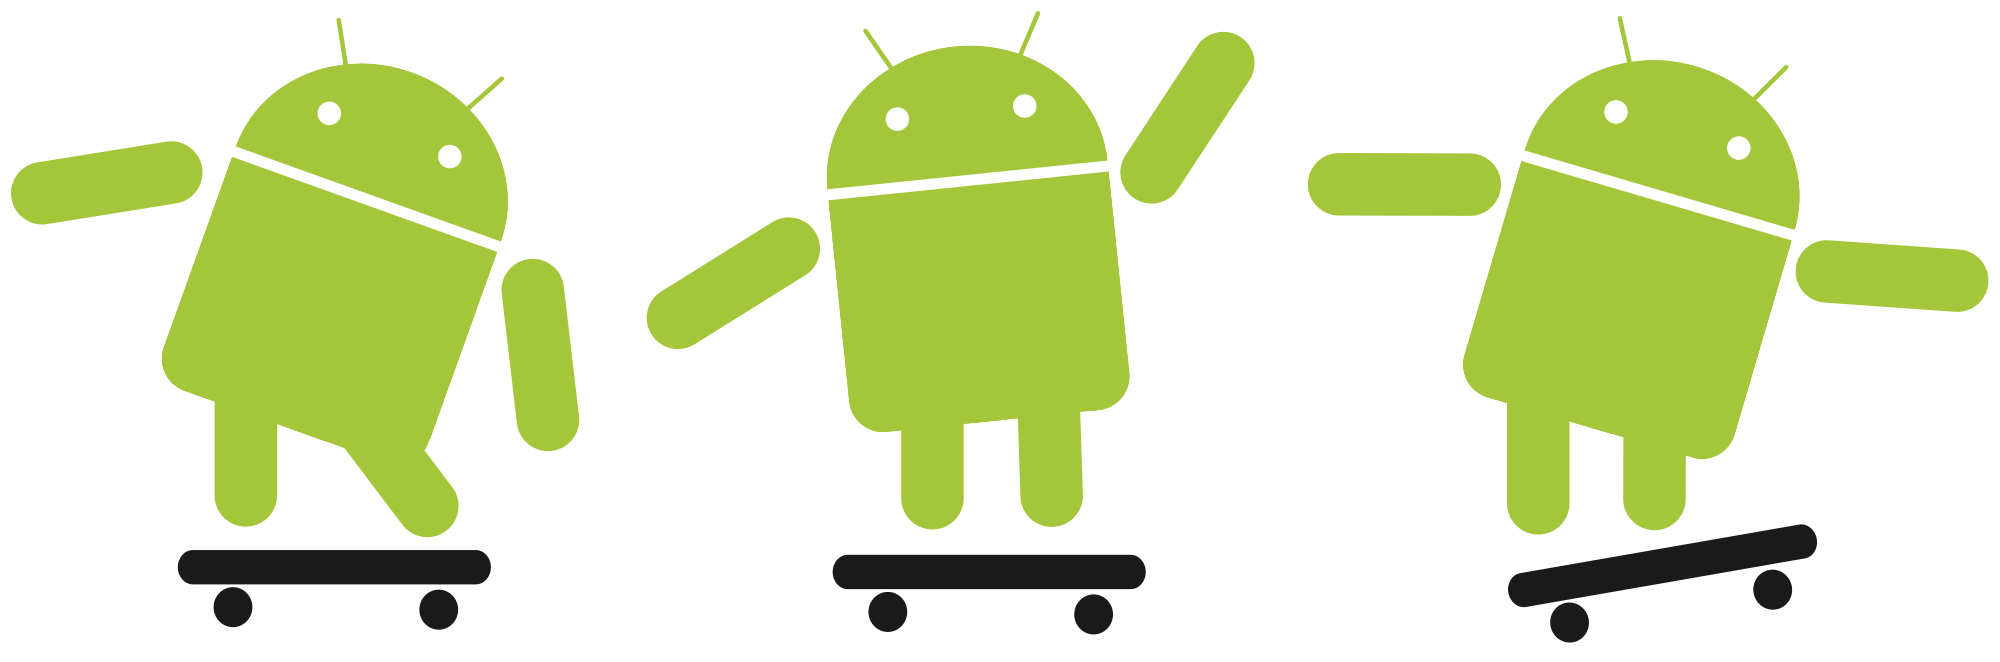 Android Robot Free Photo PNG Image